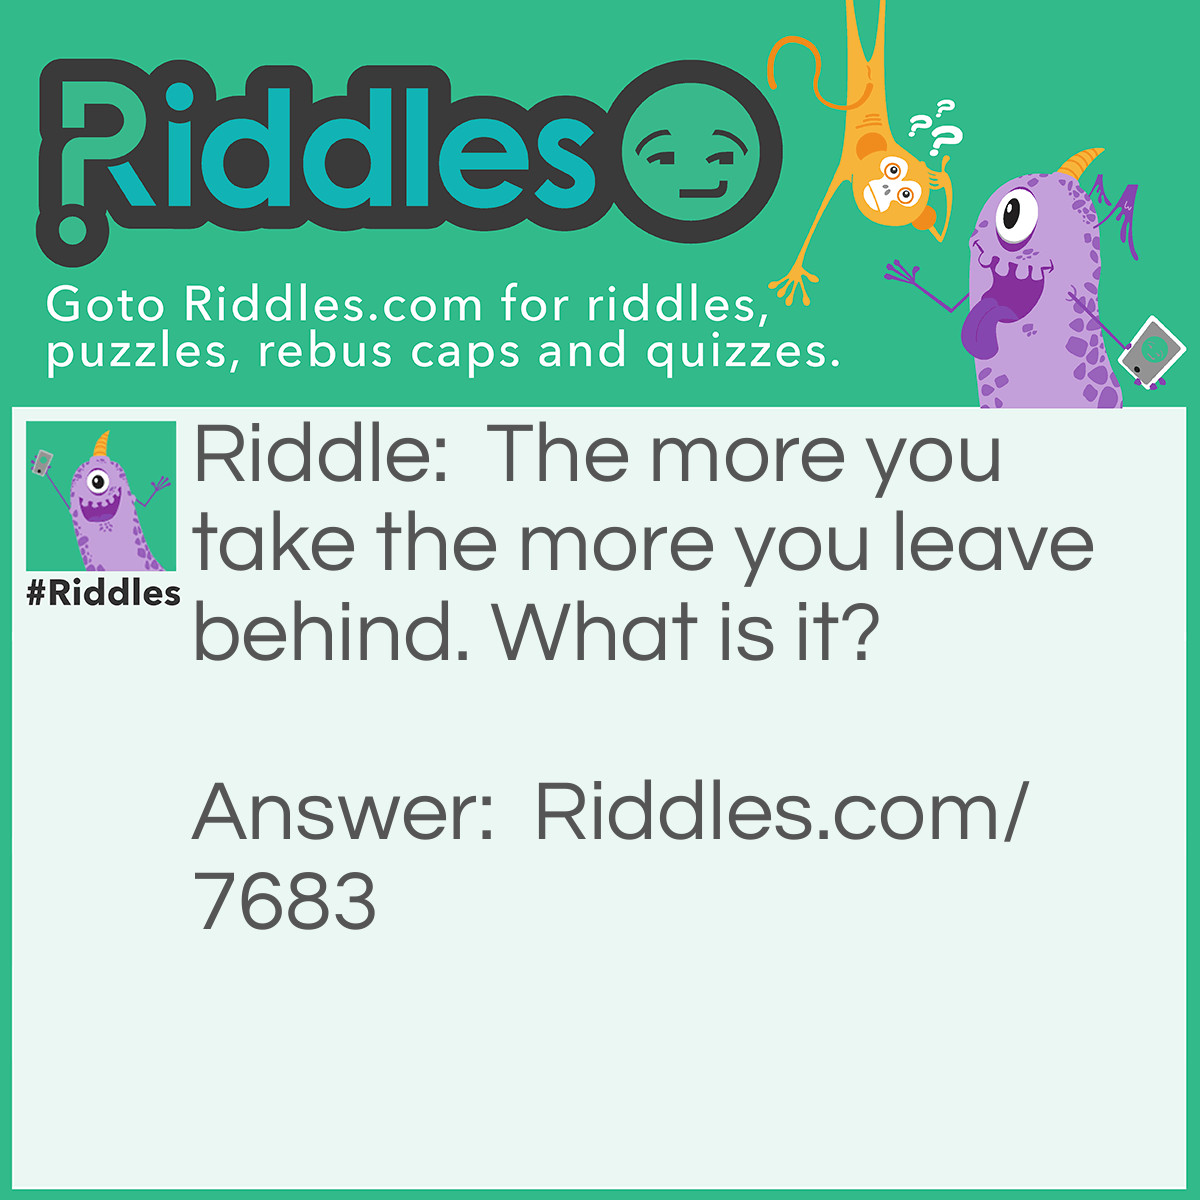 Riddle: The more you take the more you leave behind. What is it? Answer: Footsteps.